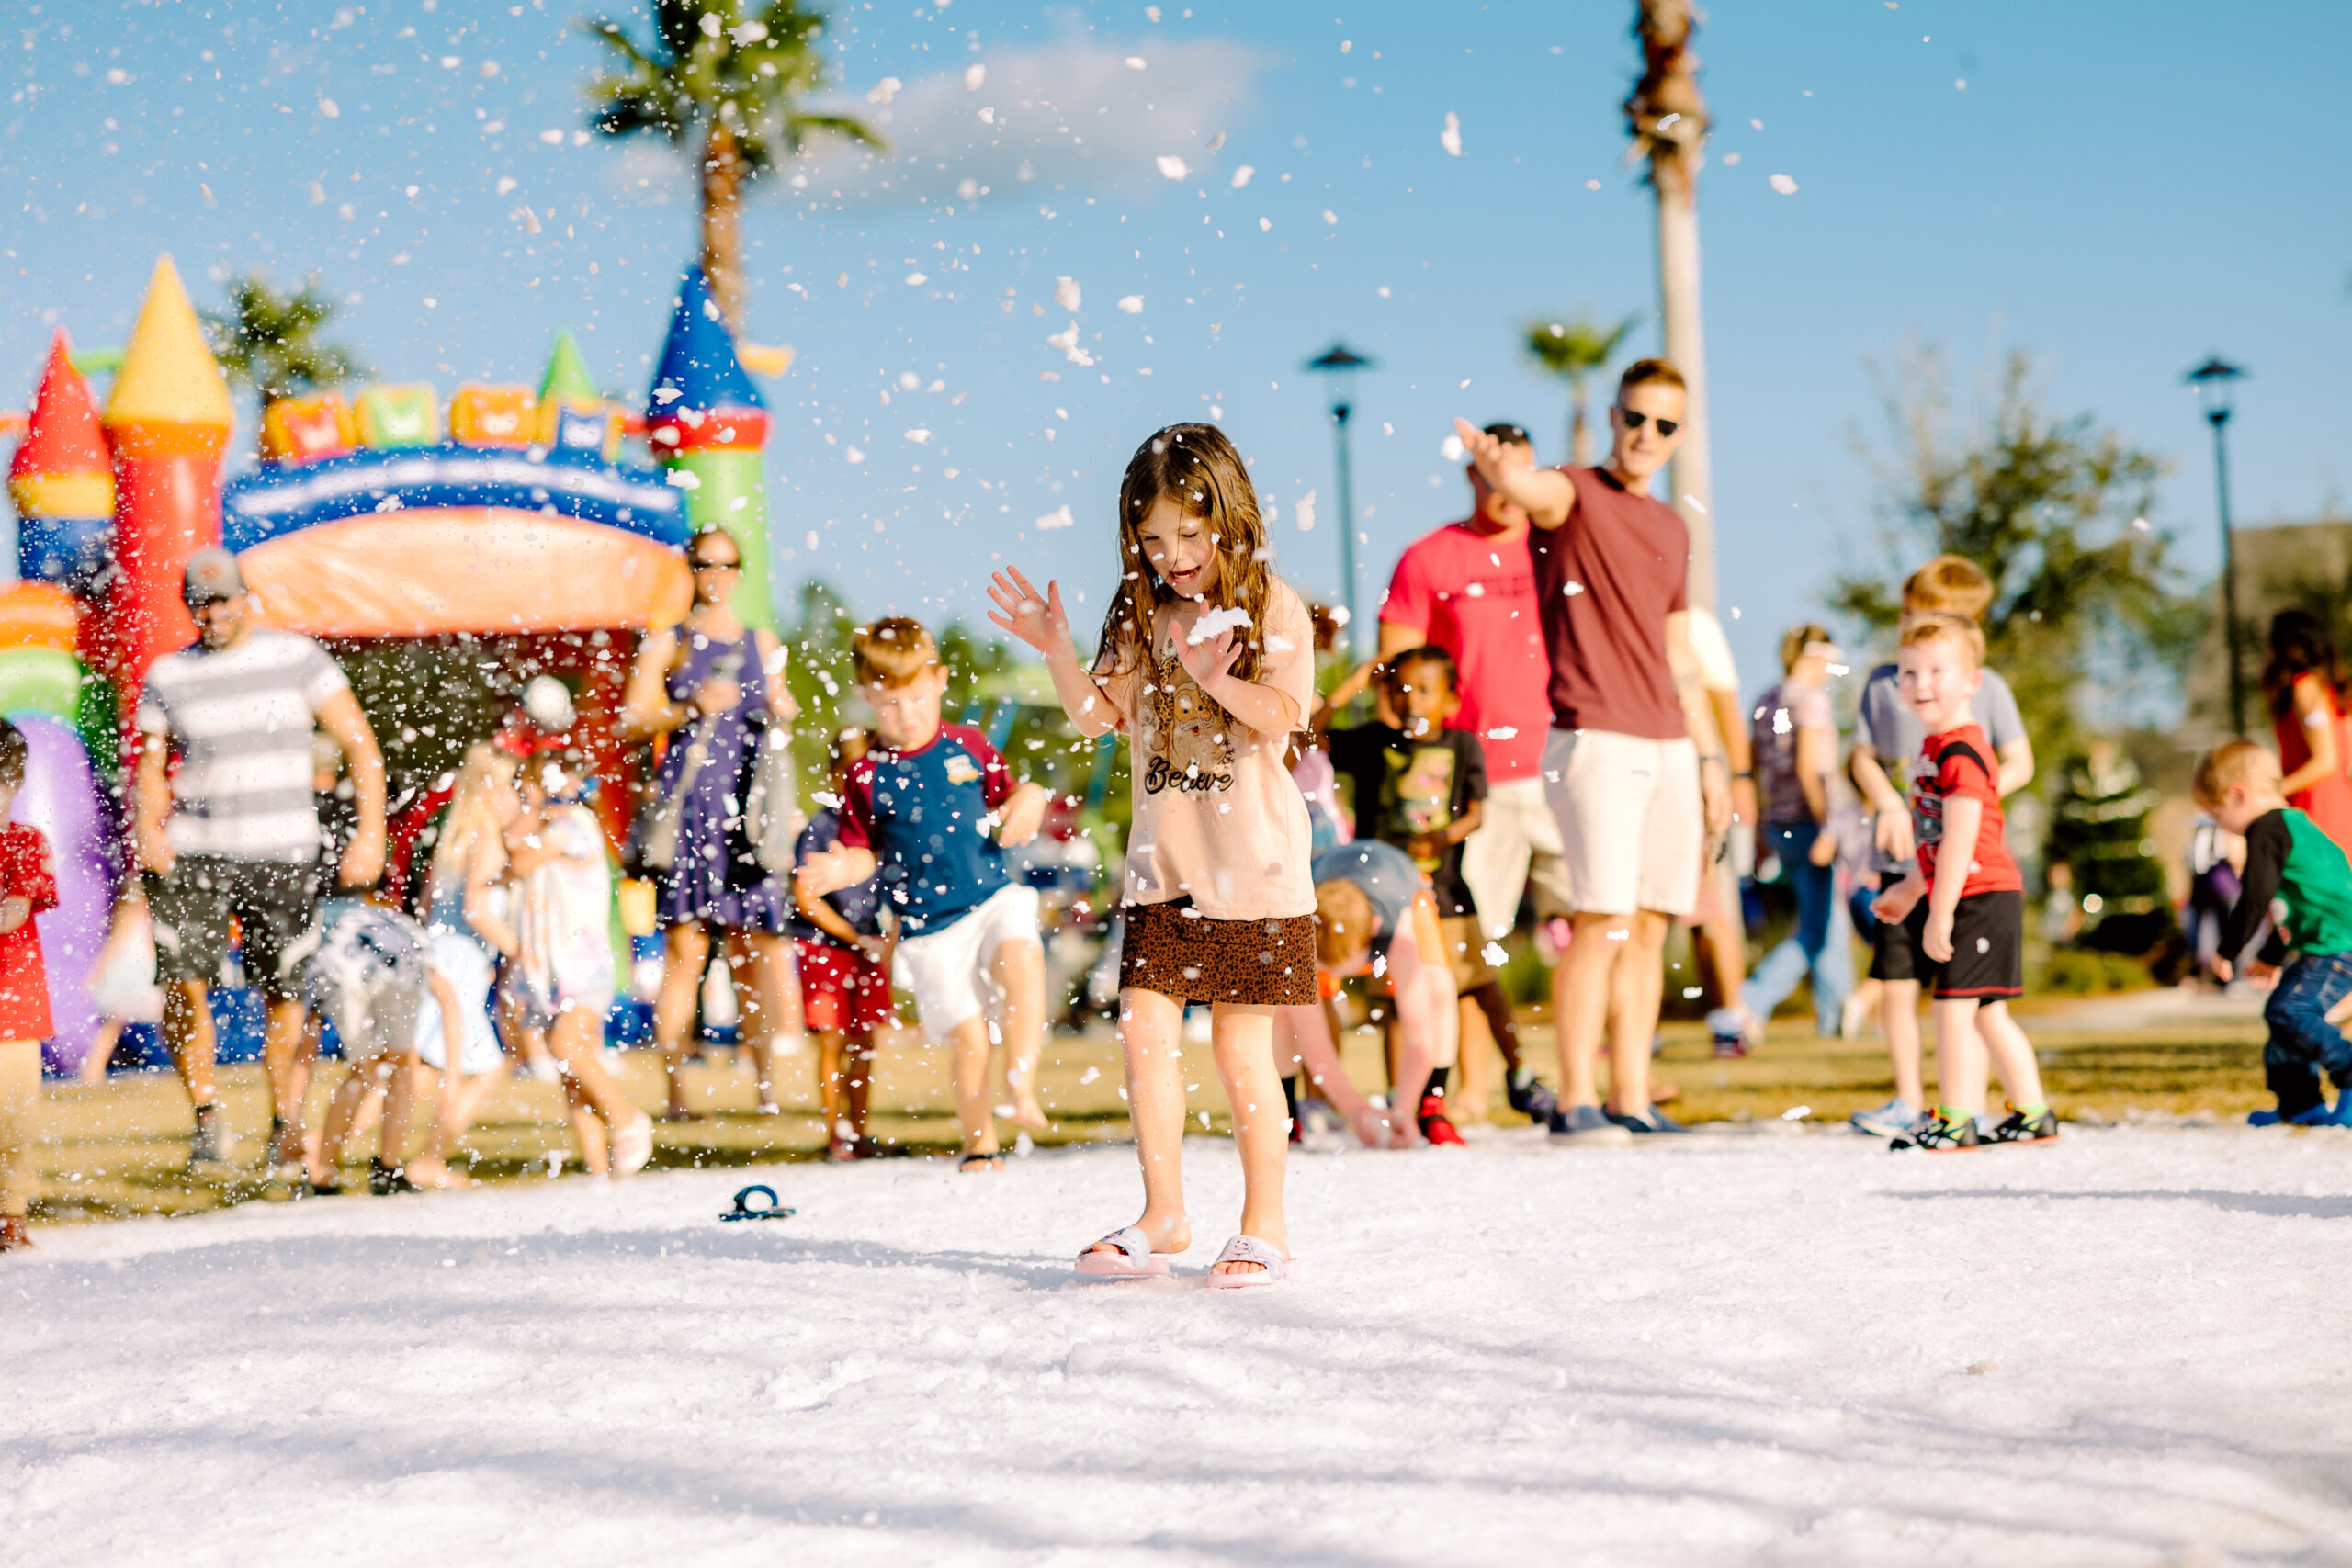 A group of children playing in the snow at Winterfest.